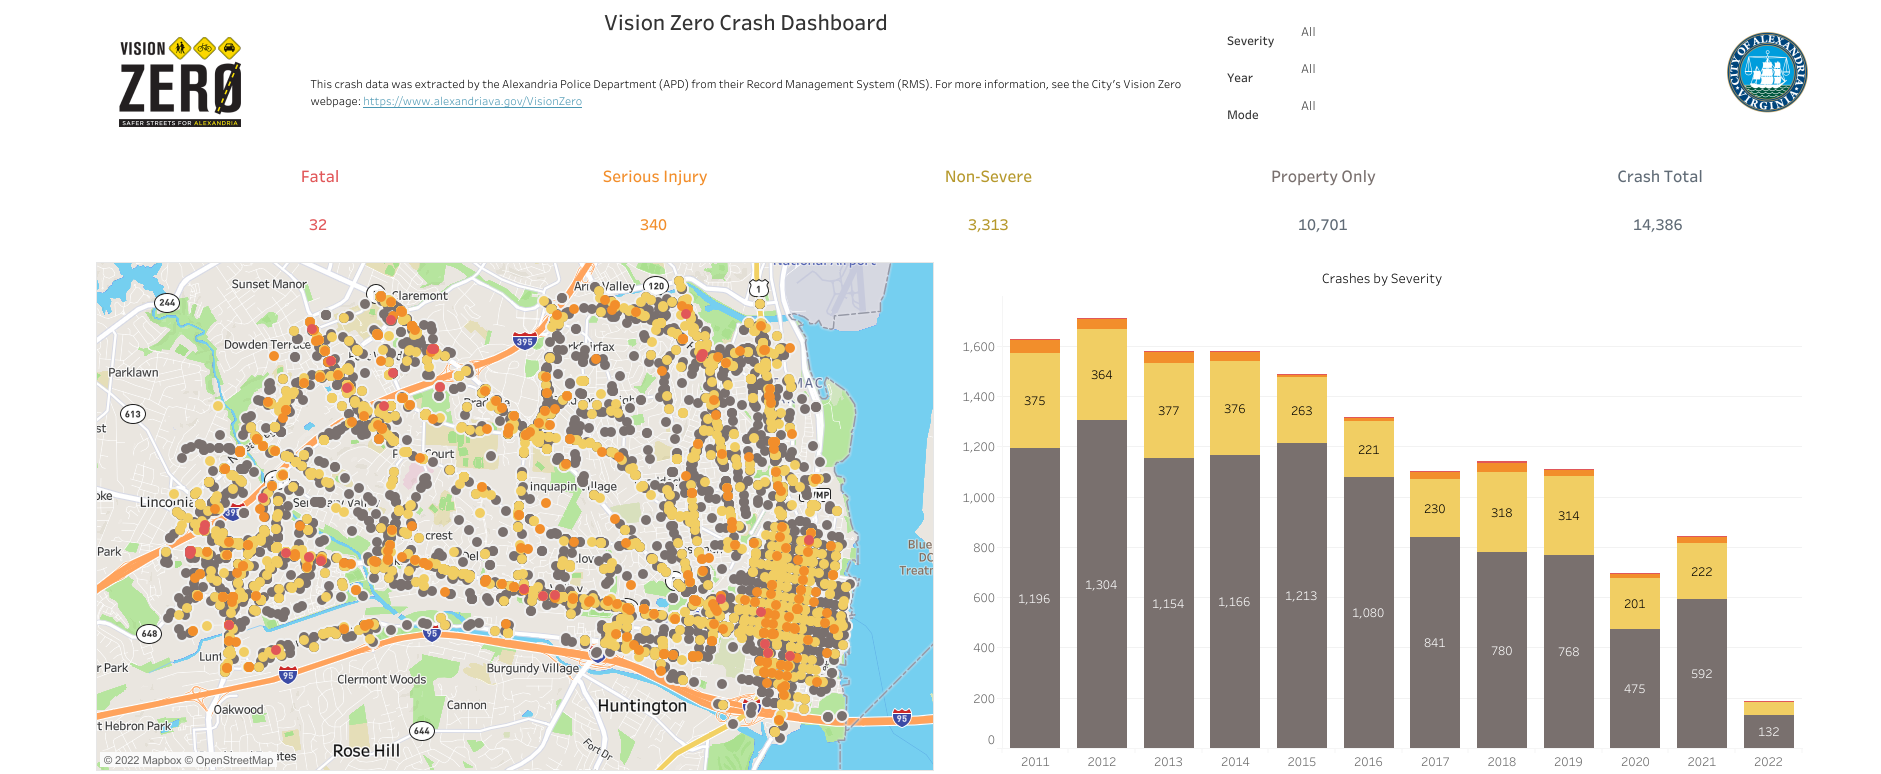 An image of the City's Vision Zero Crash Dashboard, which shows citywide crash data across multiple years.